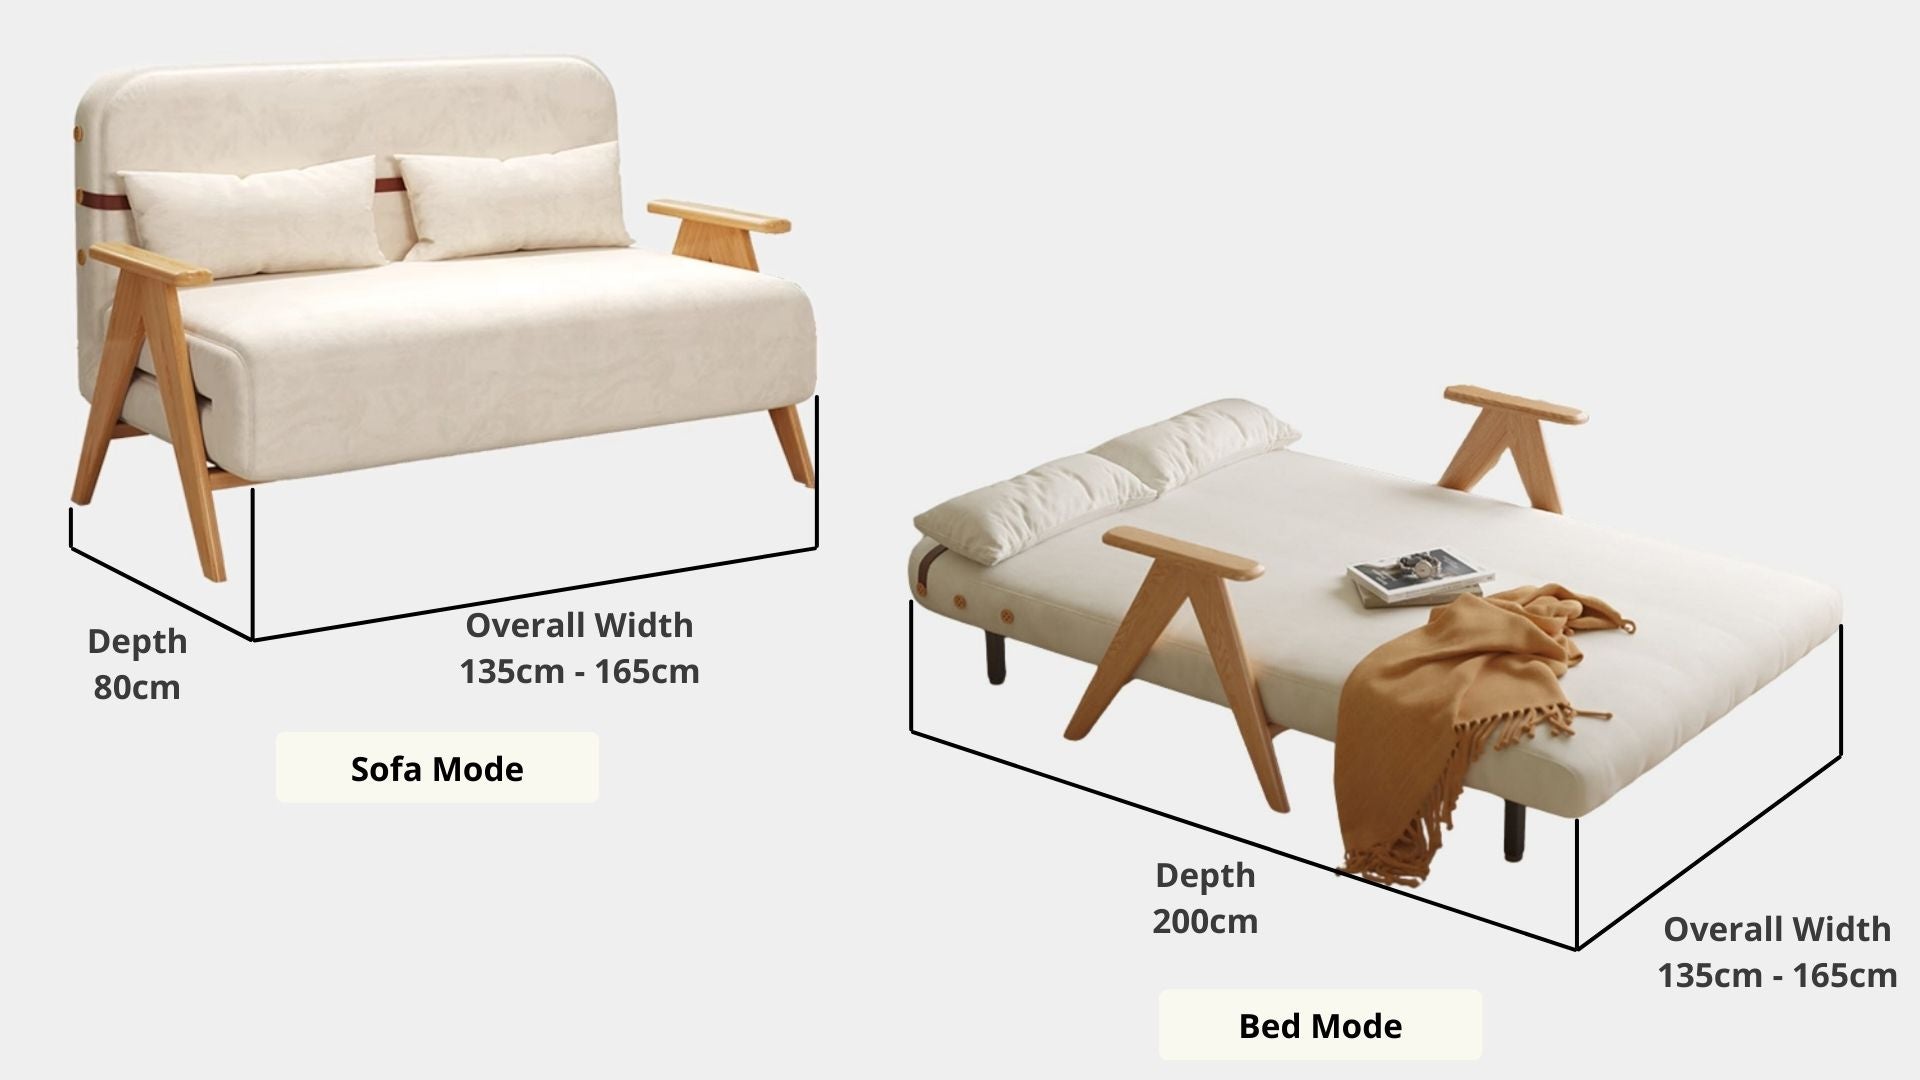 Details the key dimensions in terms of overall width, overall depth and seat width for Corona Fabric Sofa Bed